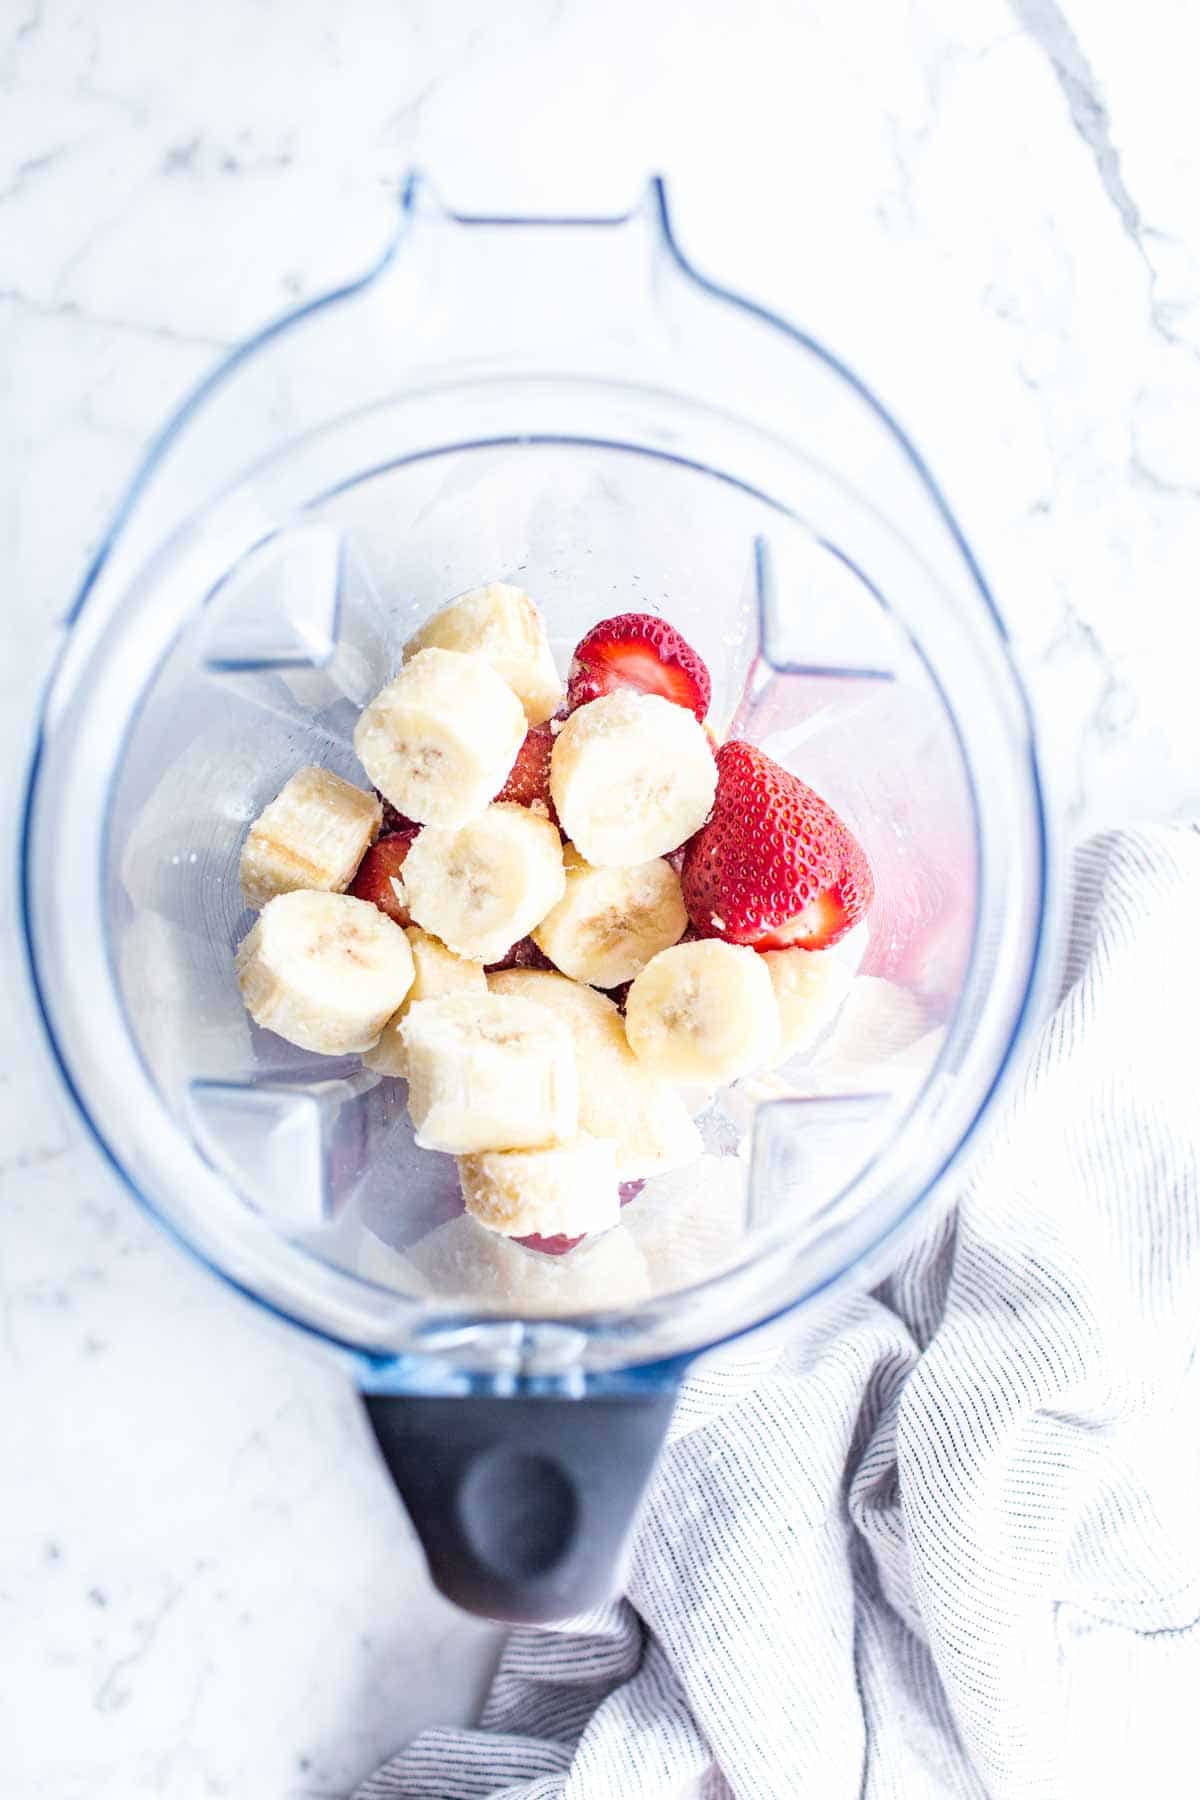 Bananas, strawberries and milk in a blender pitcher.